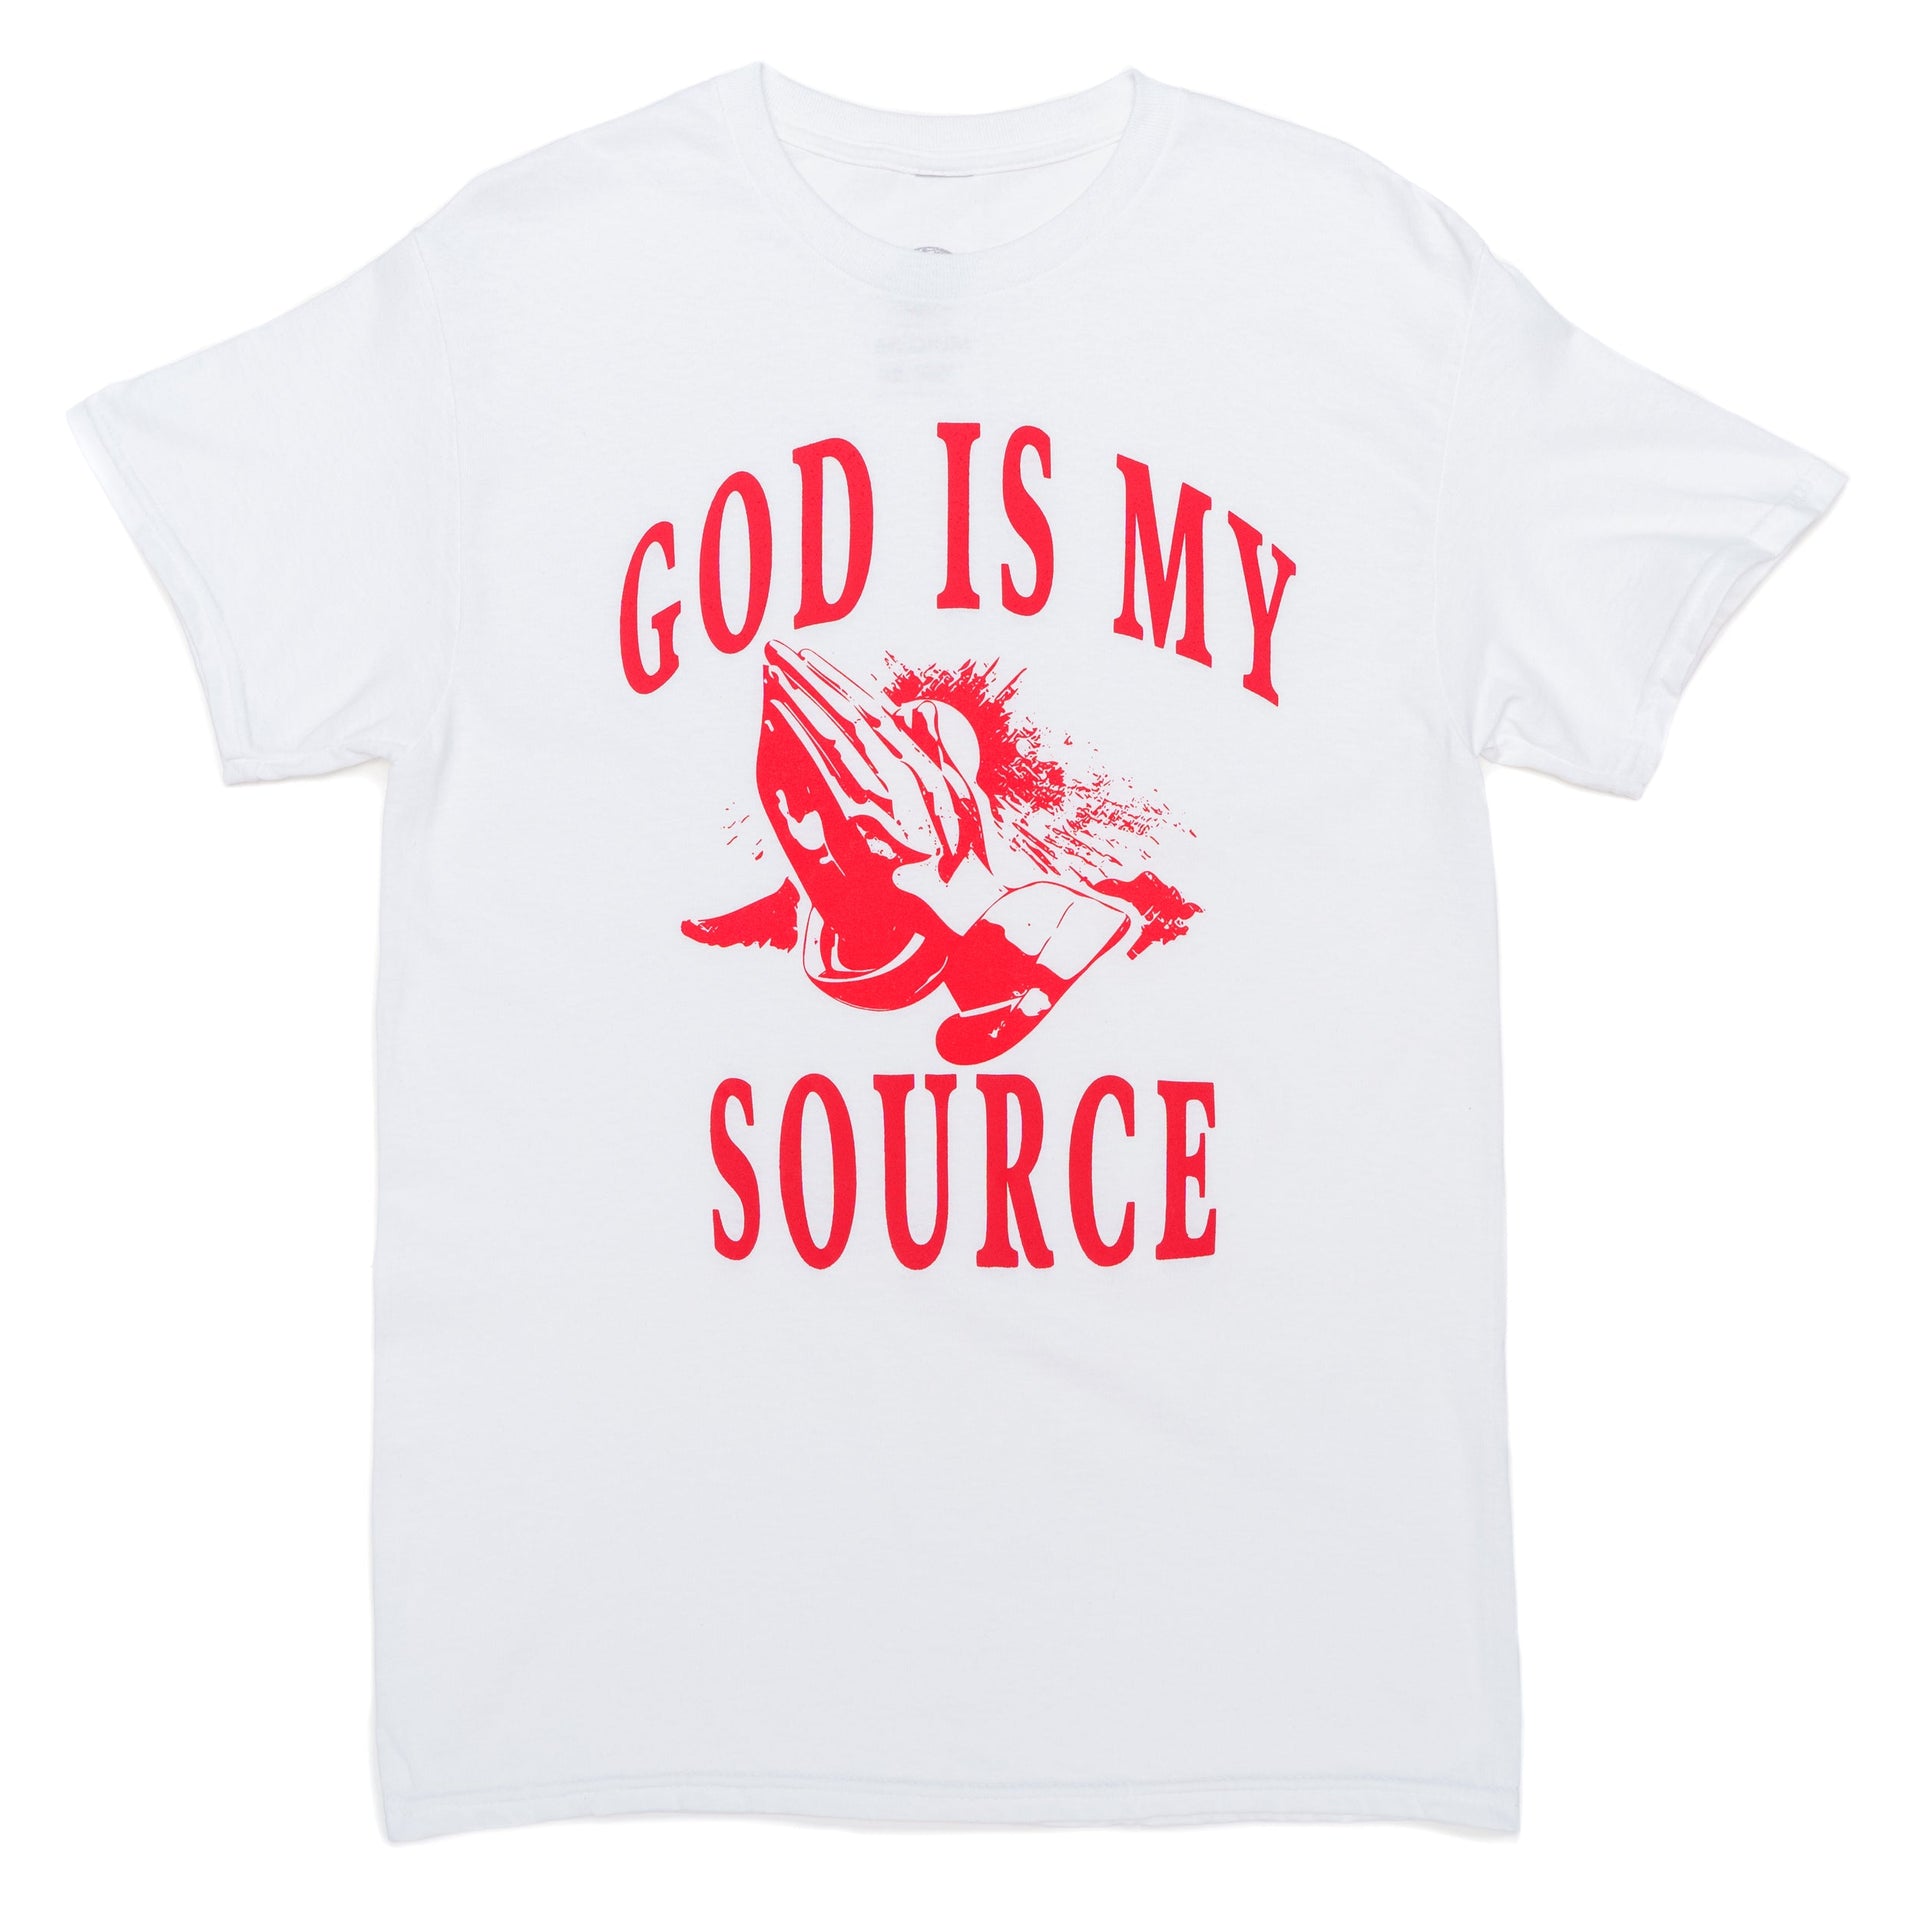 God Is My Source 'Praying Hands' T-Shirt White / Infrared - God Is My Source